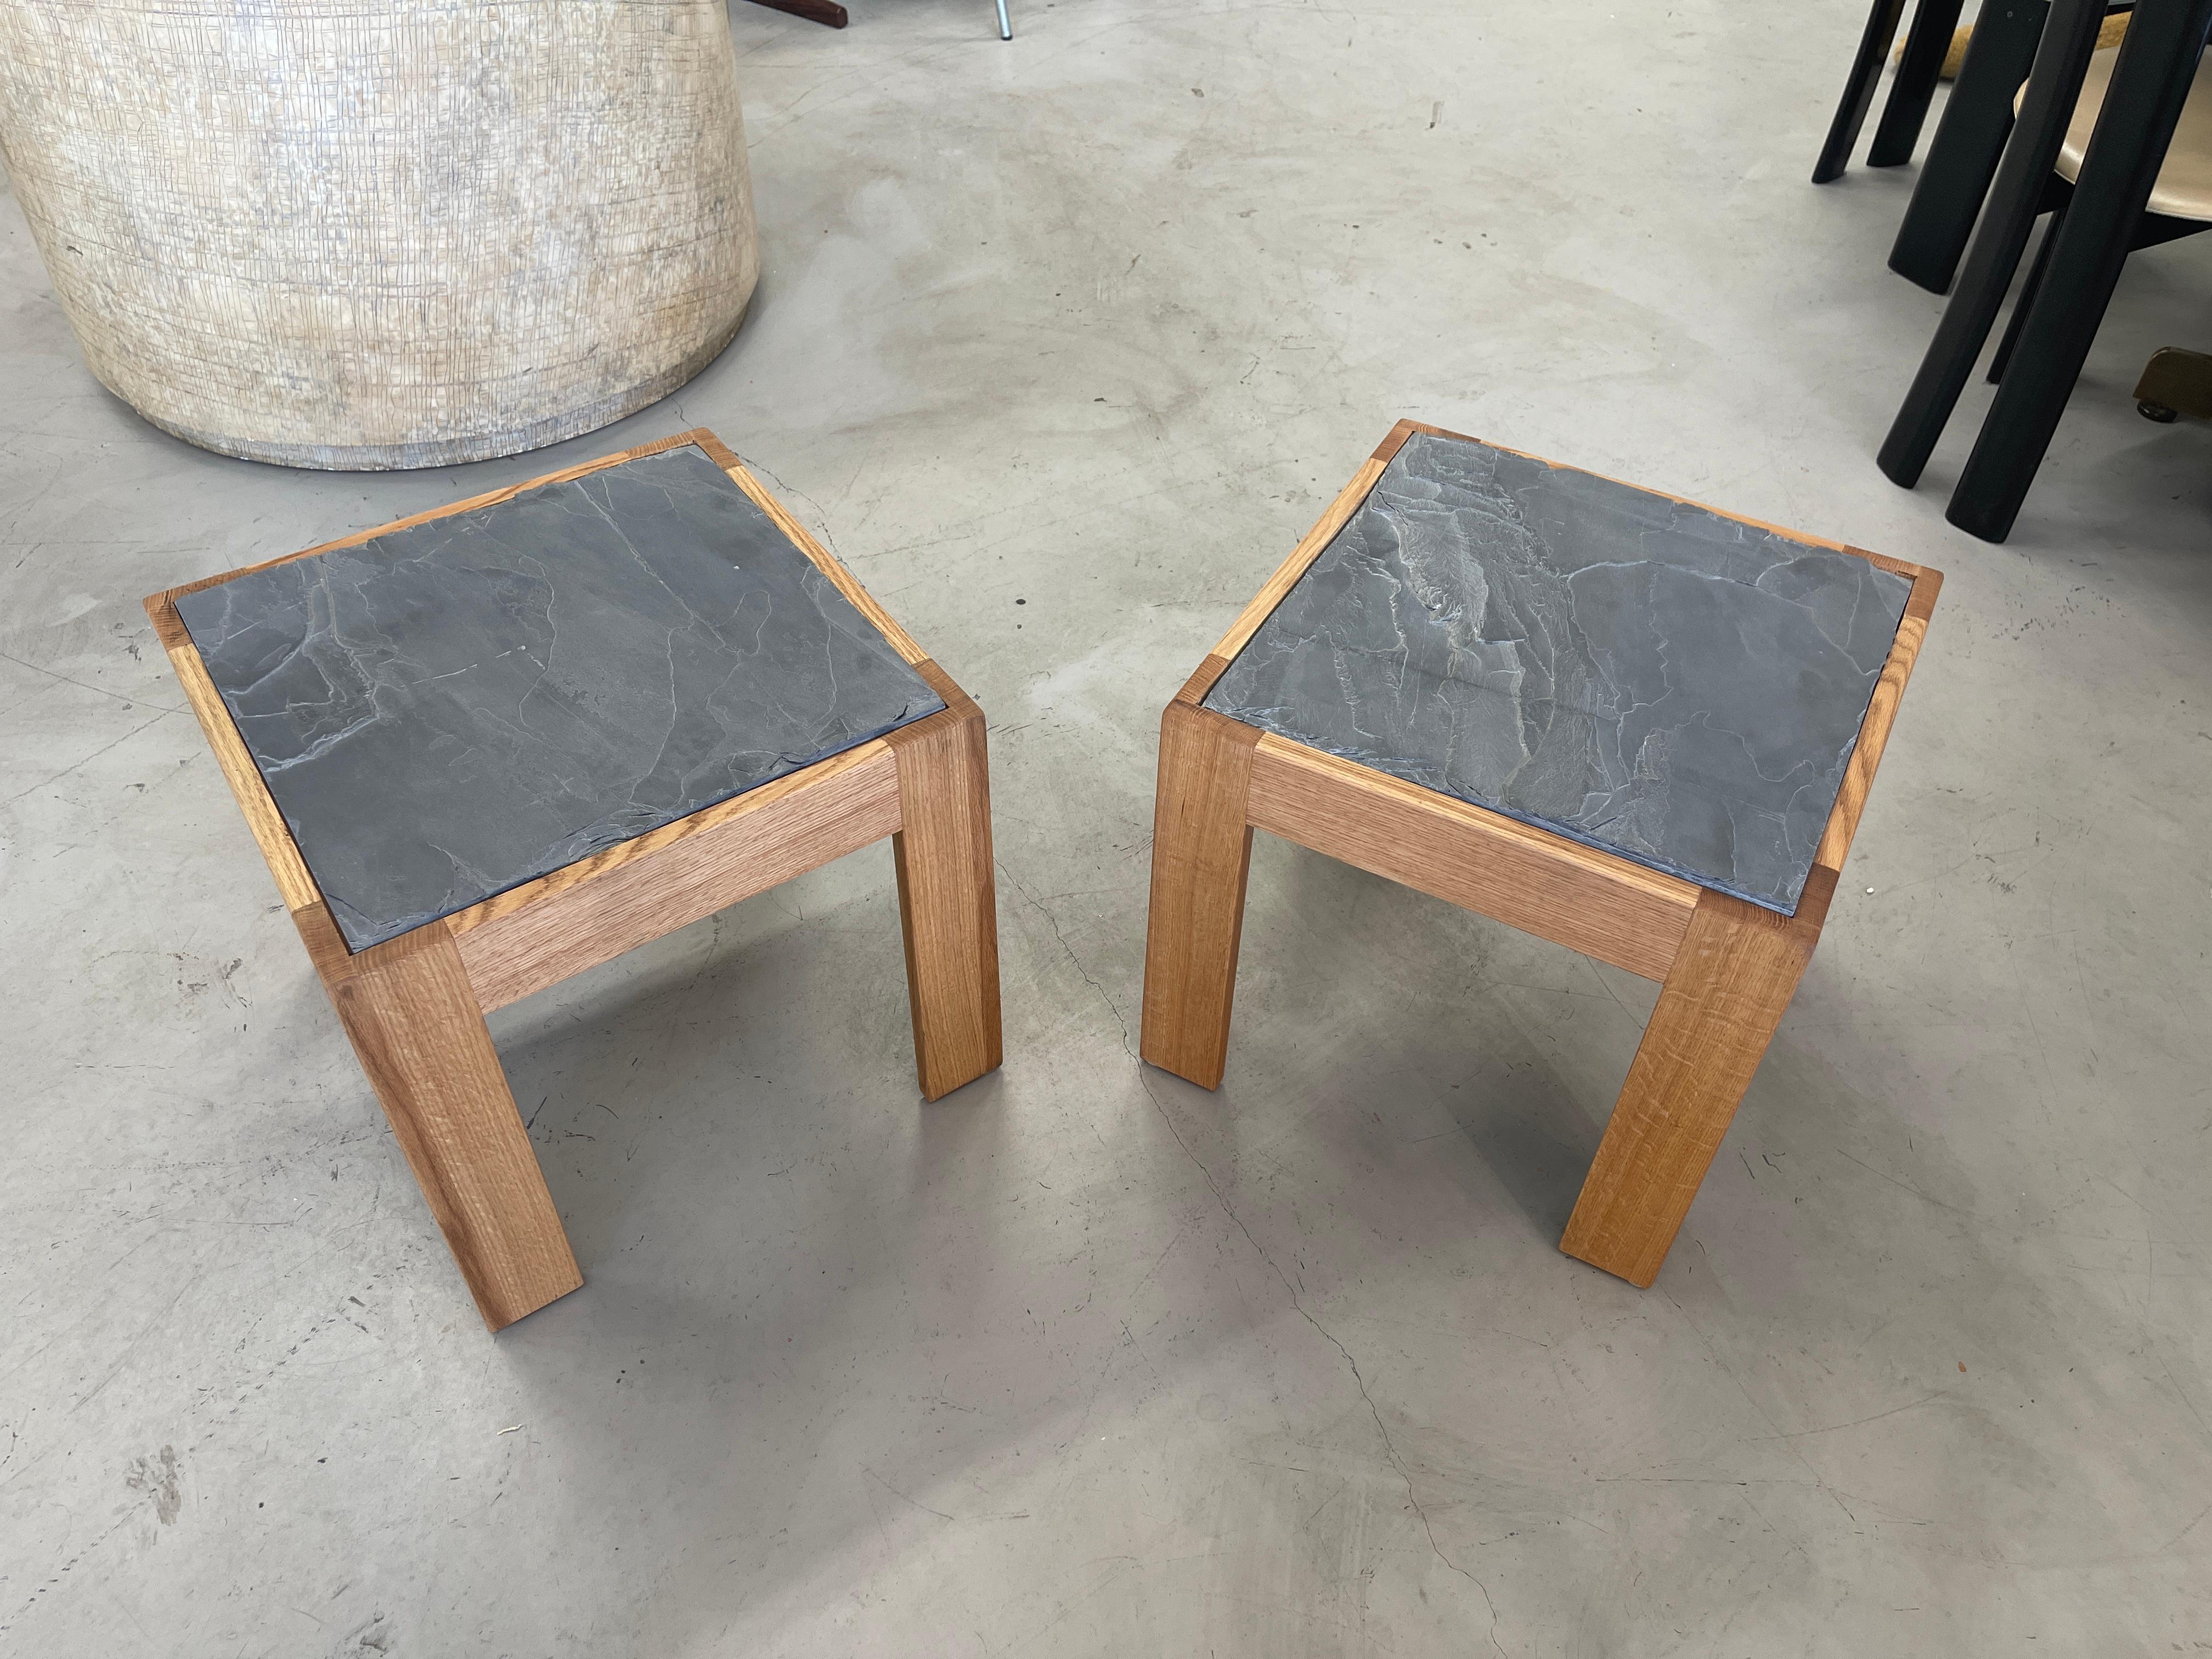 Slate Top Oak Tables In Excellent Condition For Sale In Palm Springs, CA